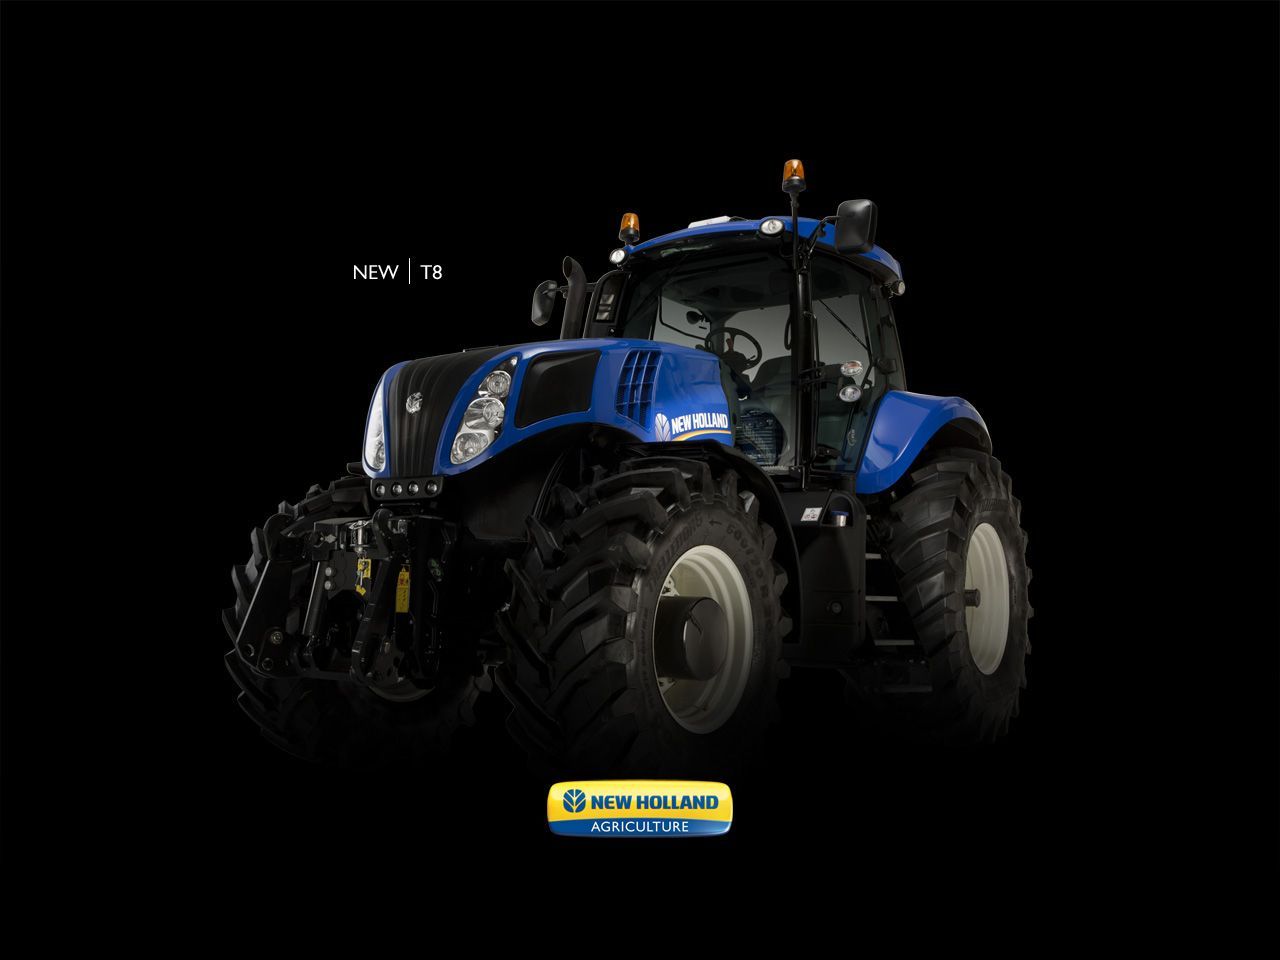 New Holland Agriculture Wallpaper. Holland Tulips Wallpaper, Holland Football Wallpaper and Holland Wallpaper